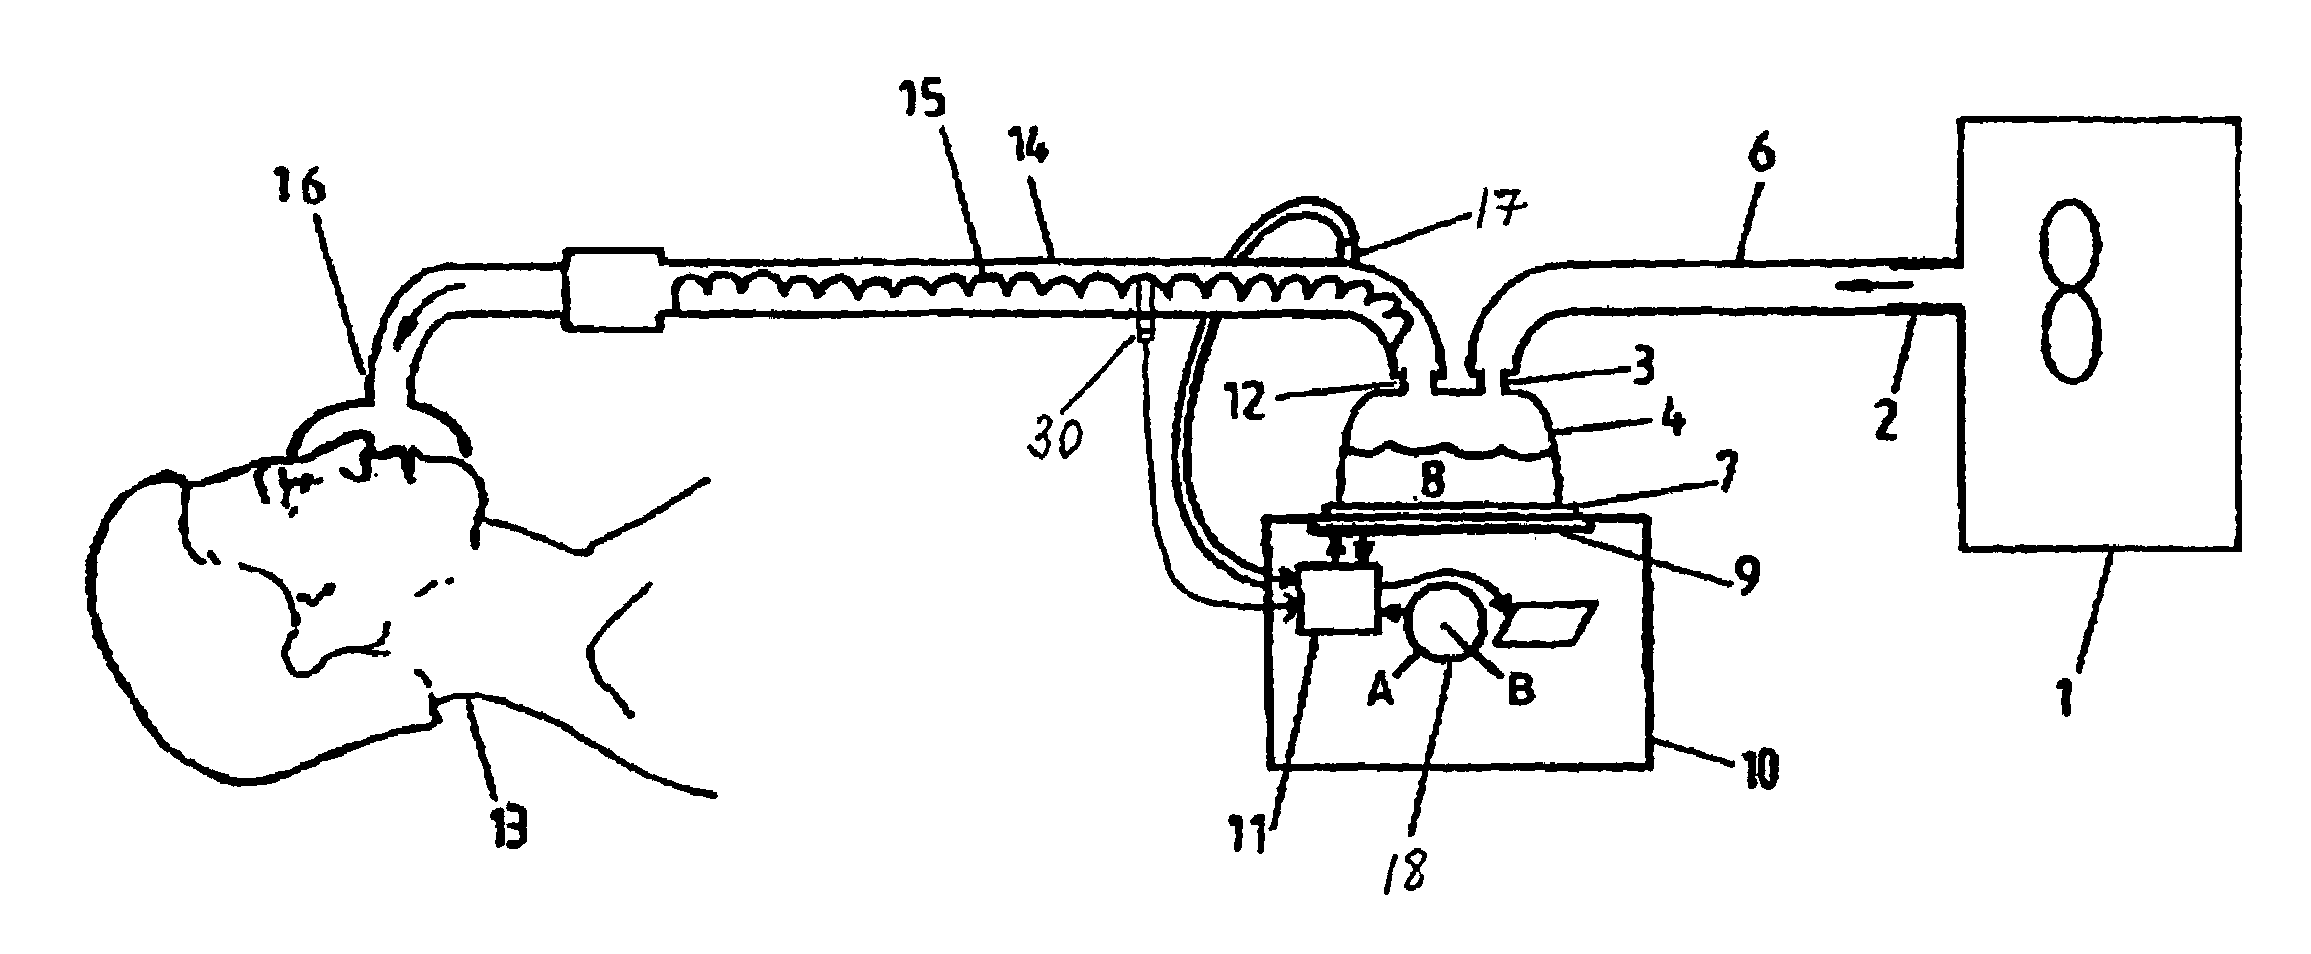 Conduit overheating detection system